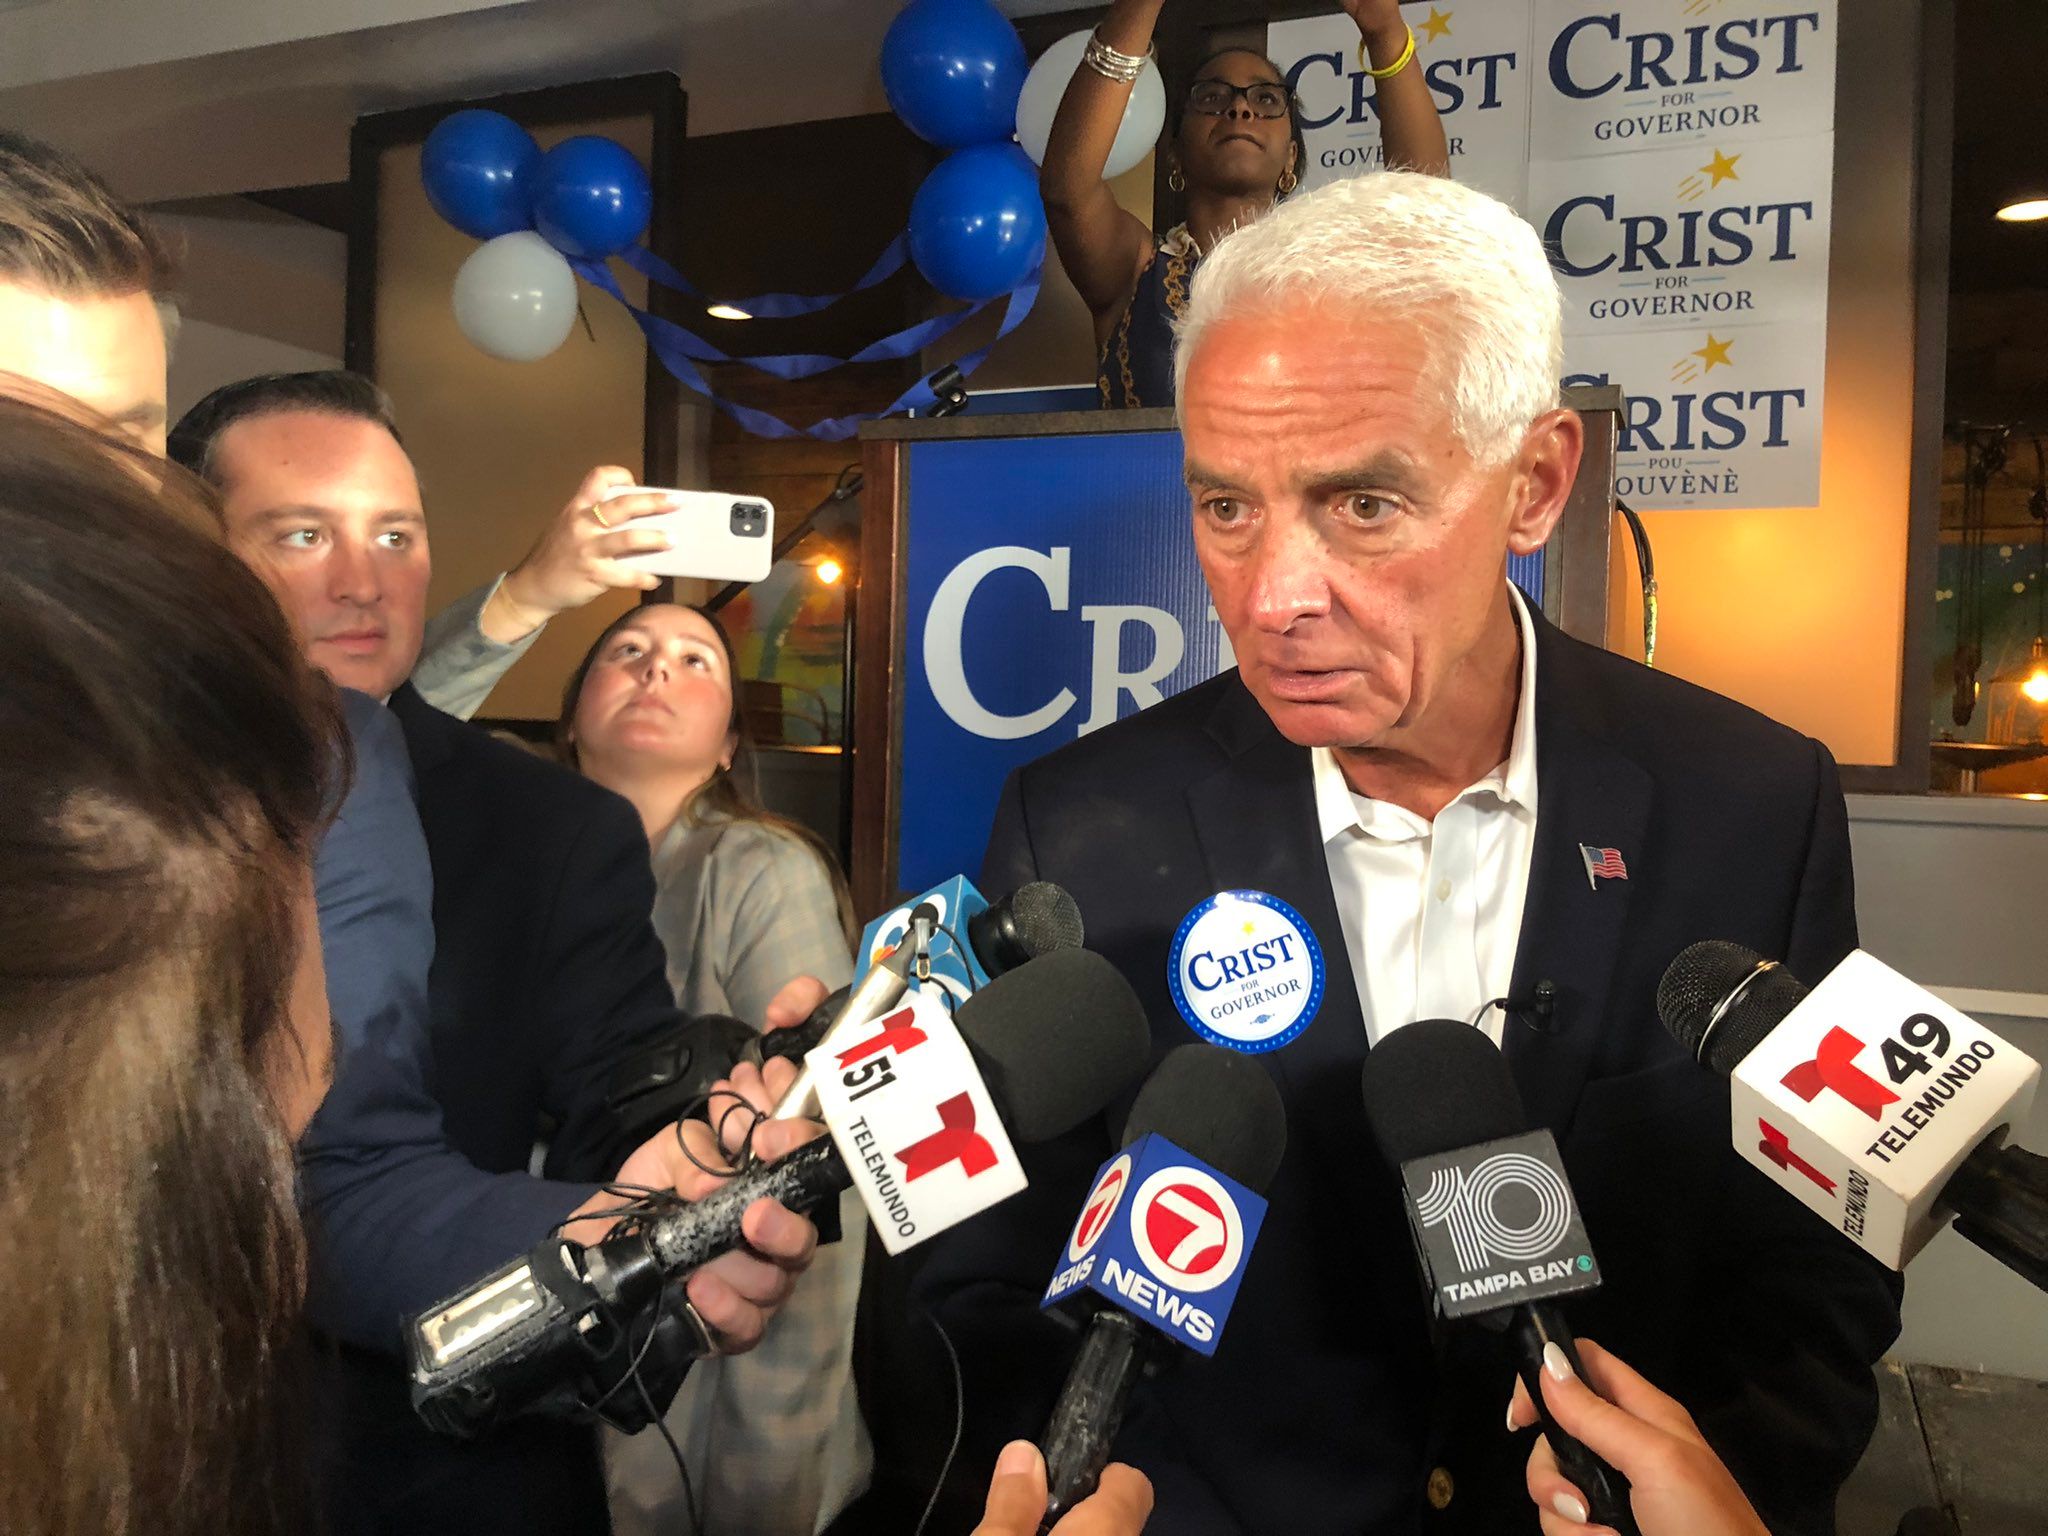 Who is Charlie Crist?